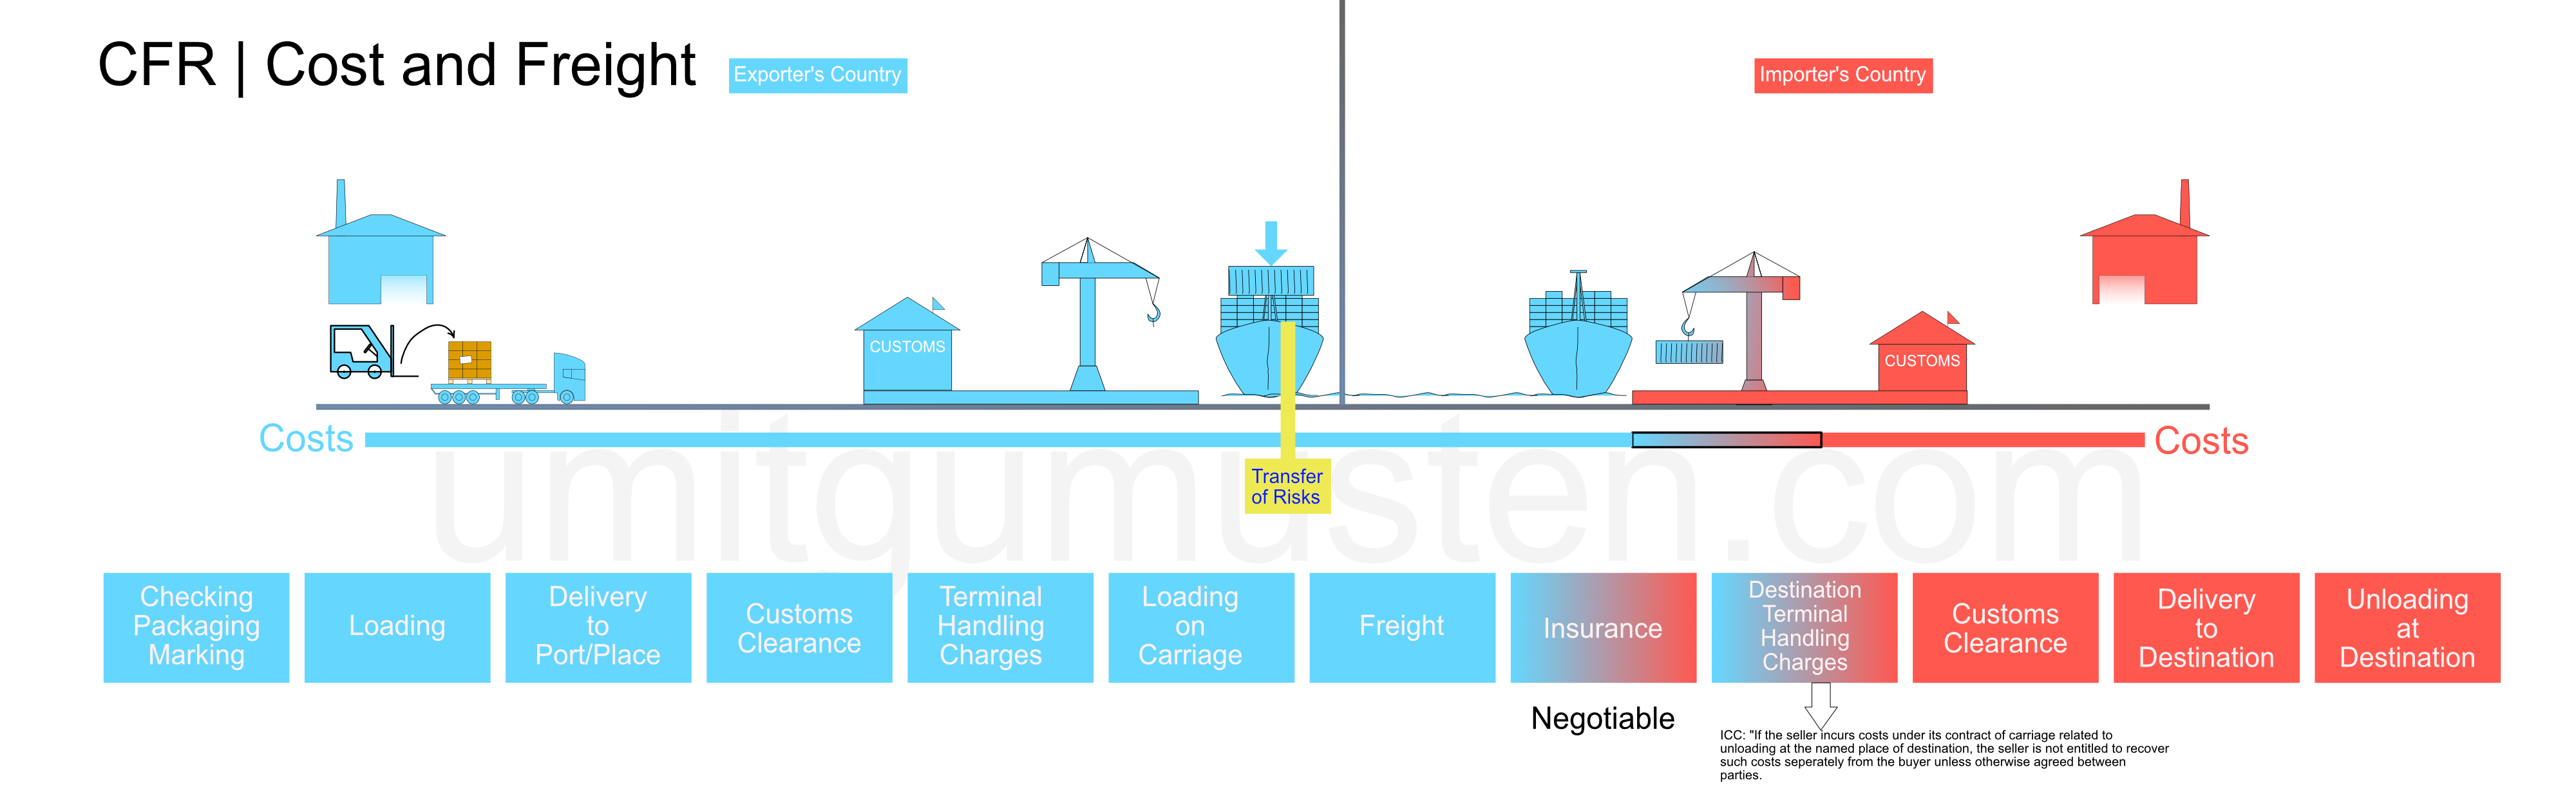 Cfr Incoterms 2020 Incoterms 2020 Explained The Complete Guide Incodocs Rocawalegh 1807